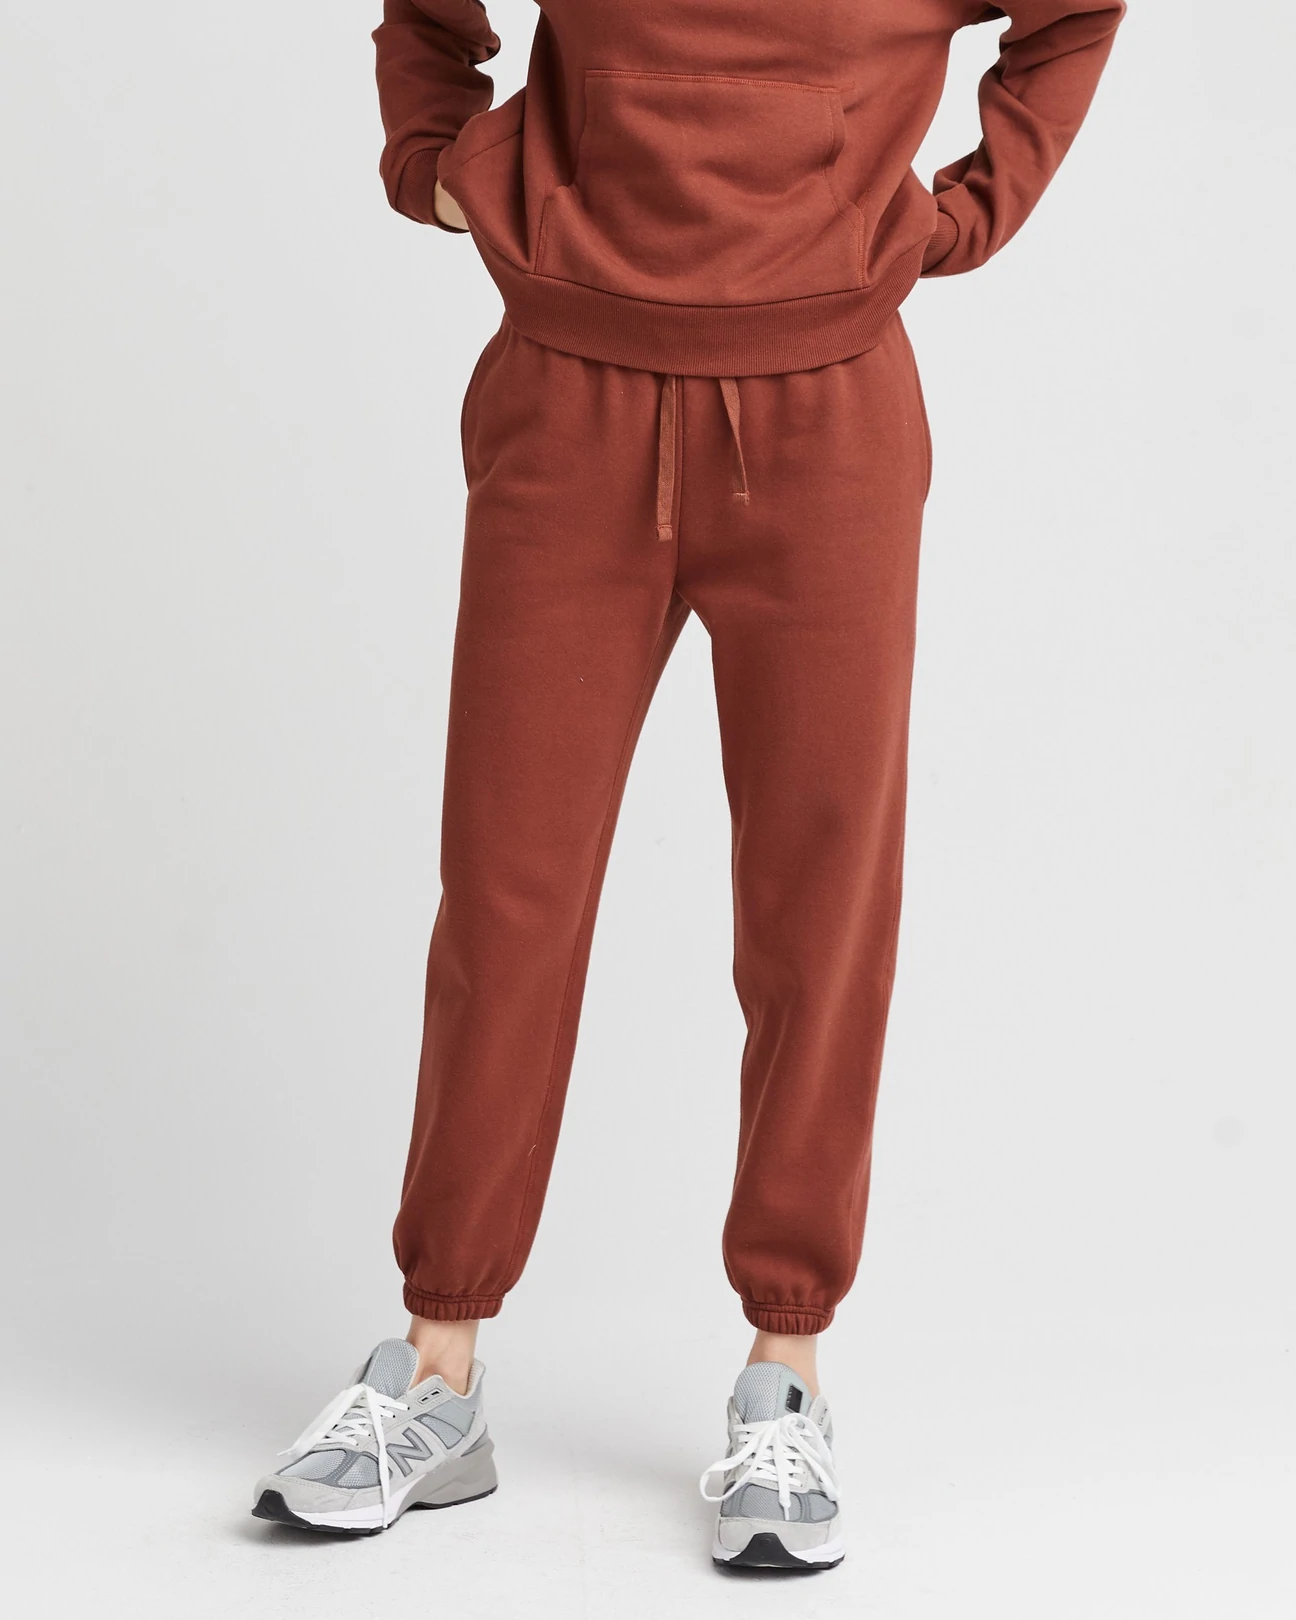 2023 Two piece women sweatpants and hoodie set Gray red black